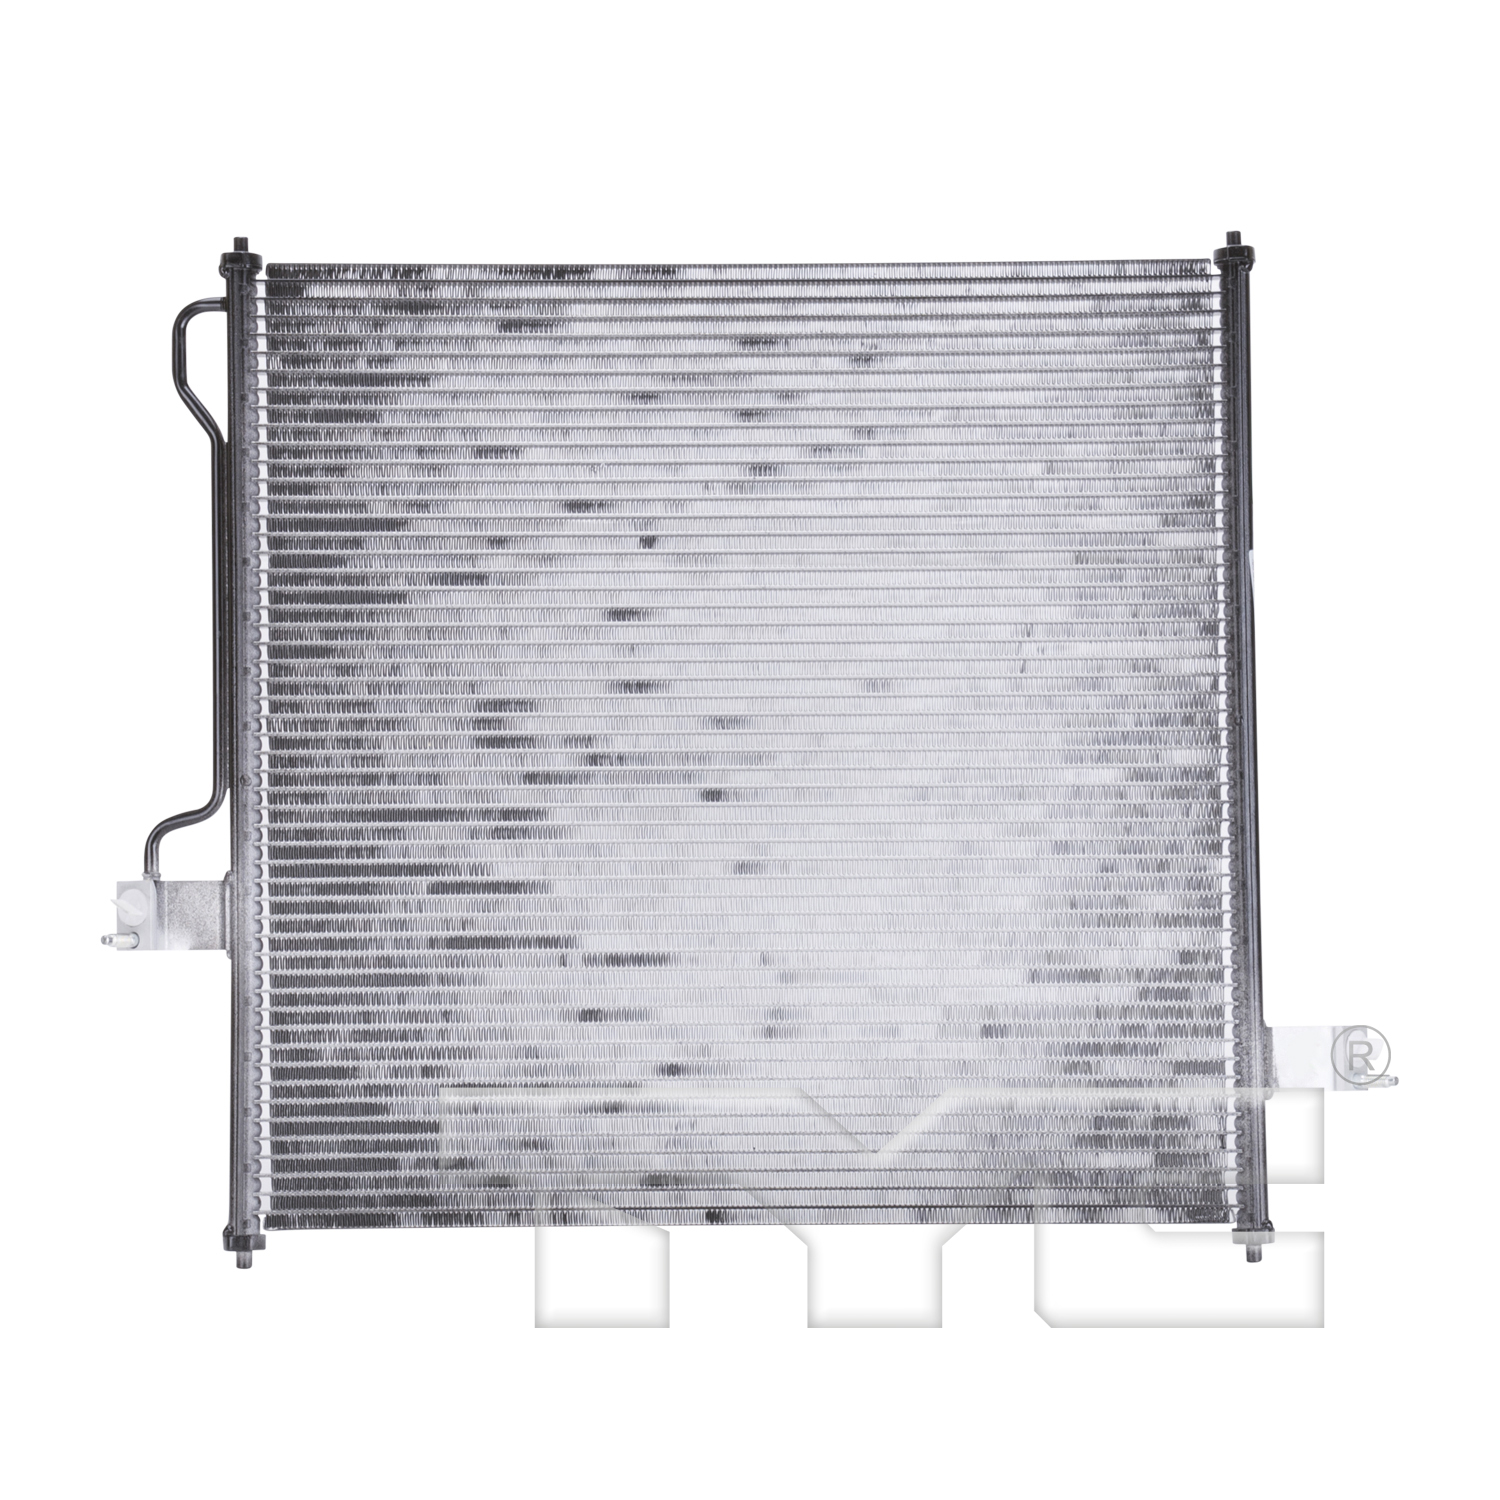 Aftermarket AC CONDENSERS for FORD - EXPLORER, EXPLORER,02-05,Air conditioning condenser